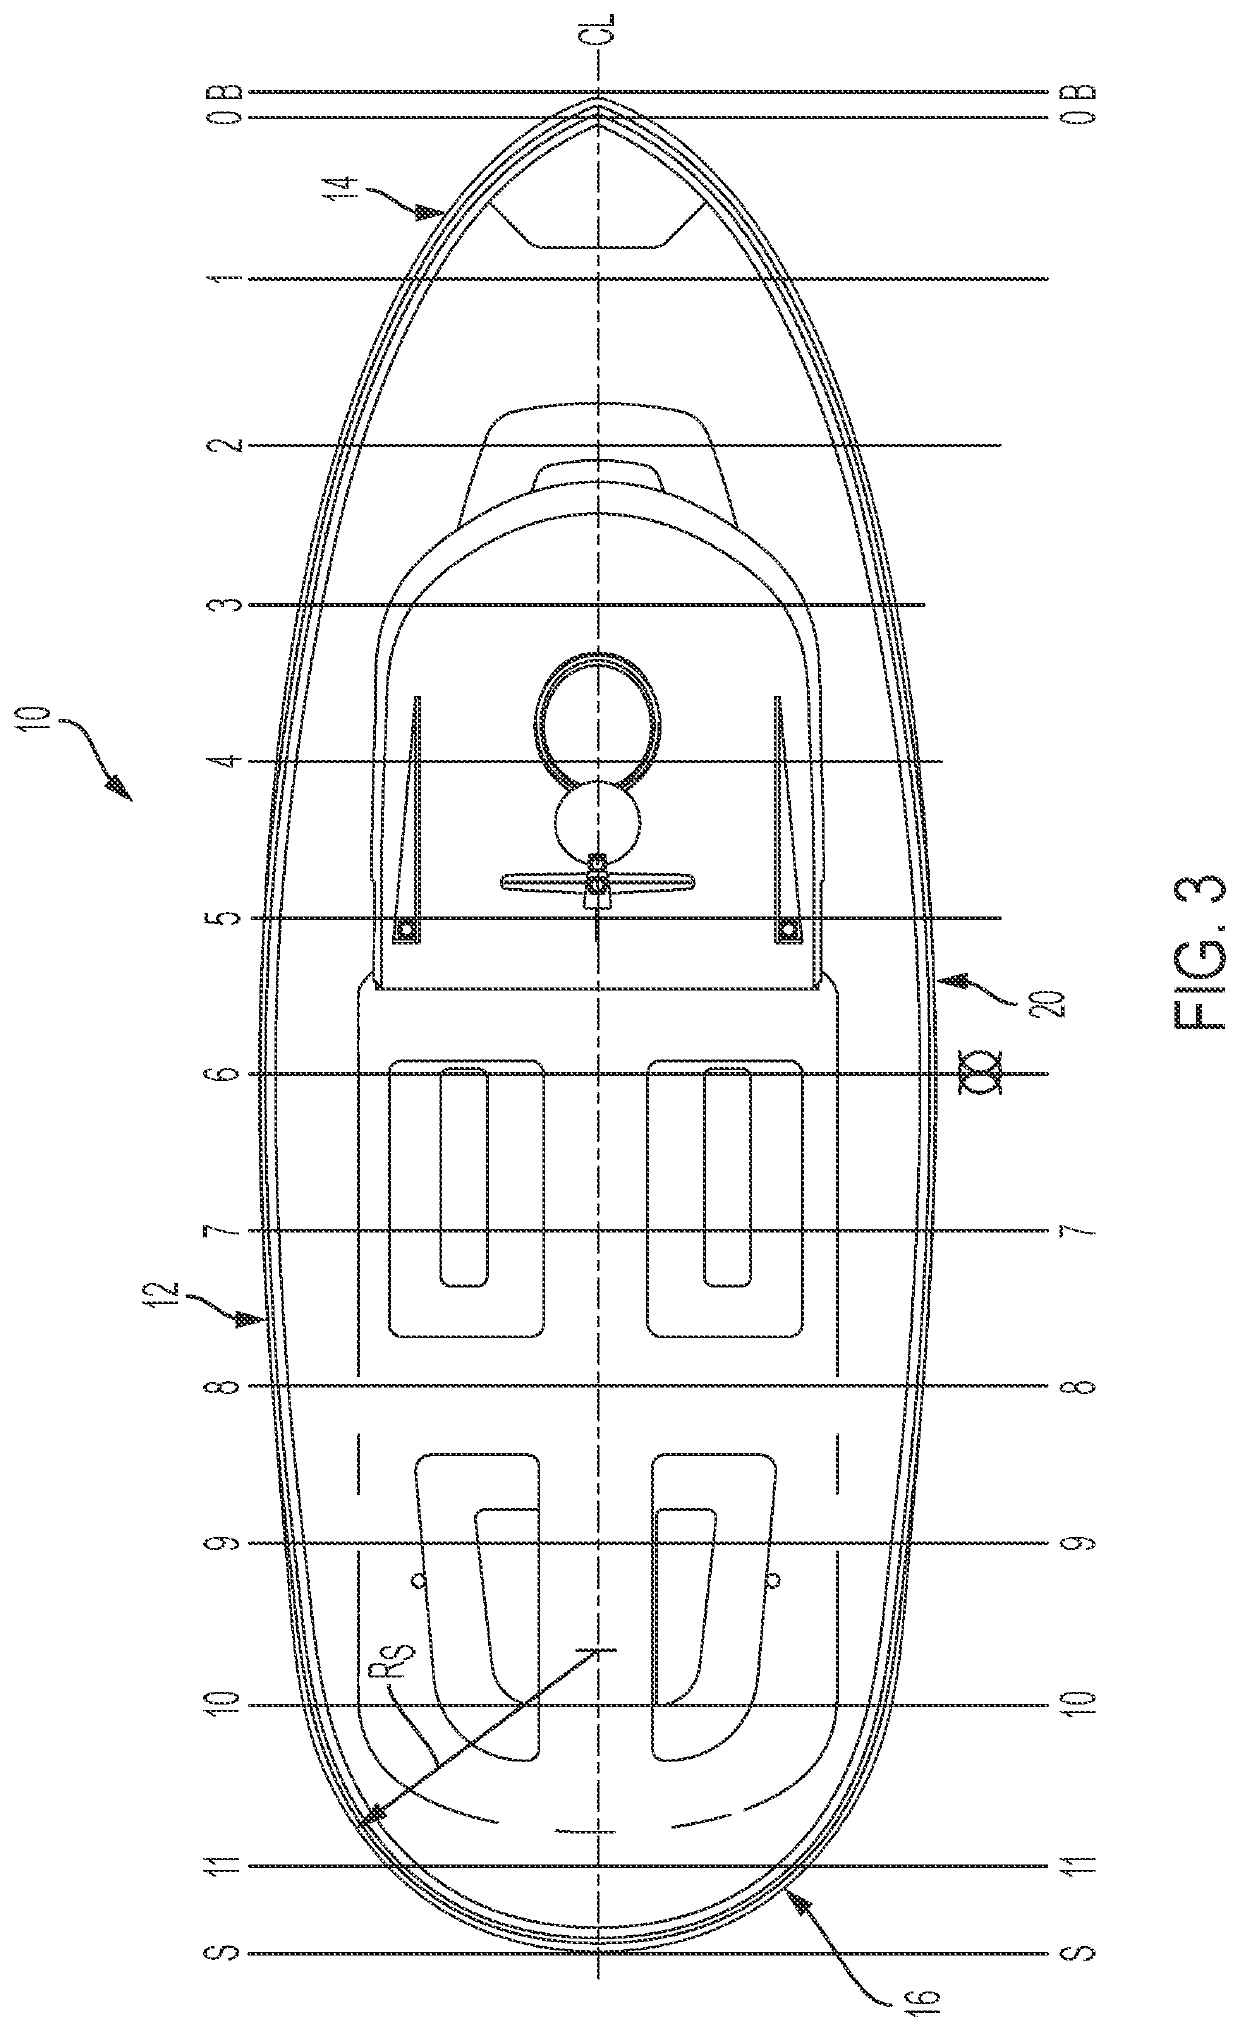 Vessel hull for forming waveforms for attraction of aquatic animals